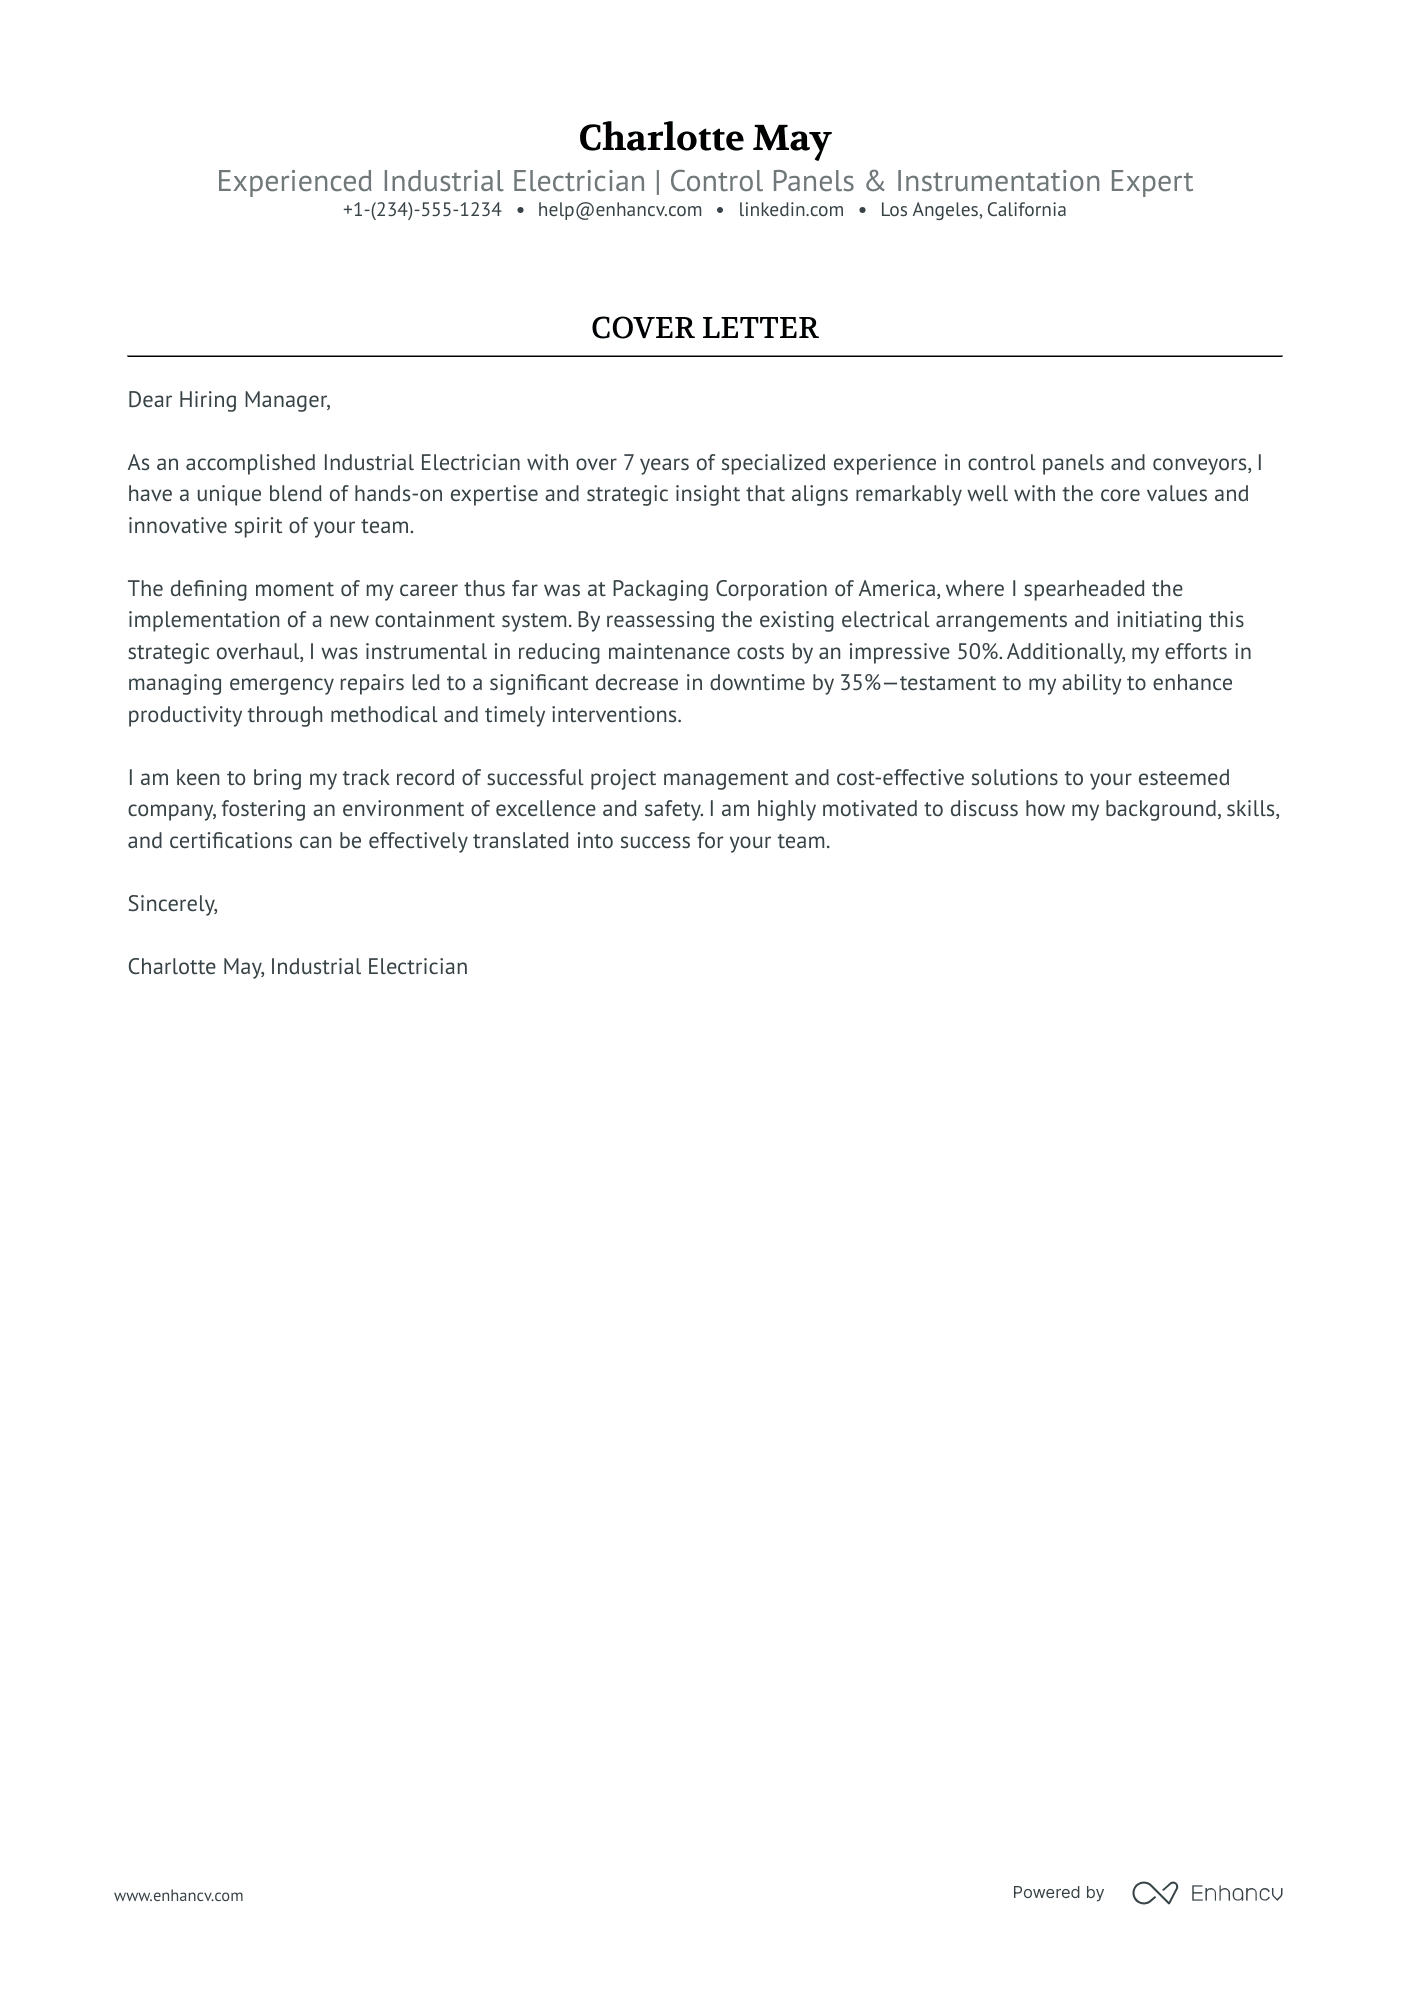 Industrial Electrician cover letter